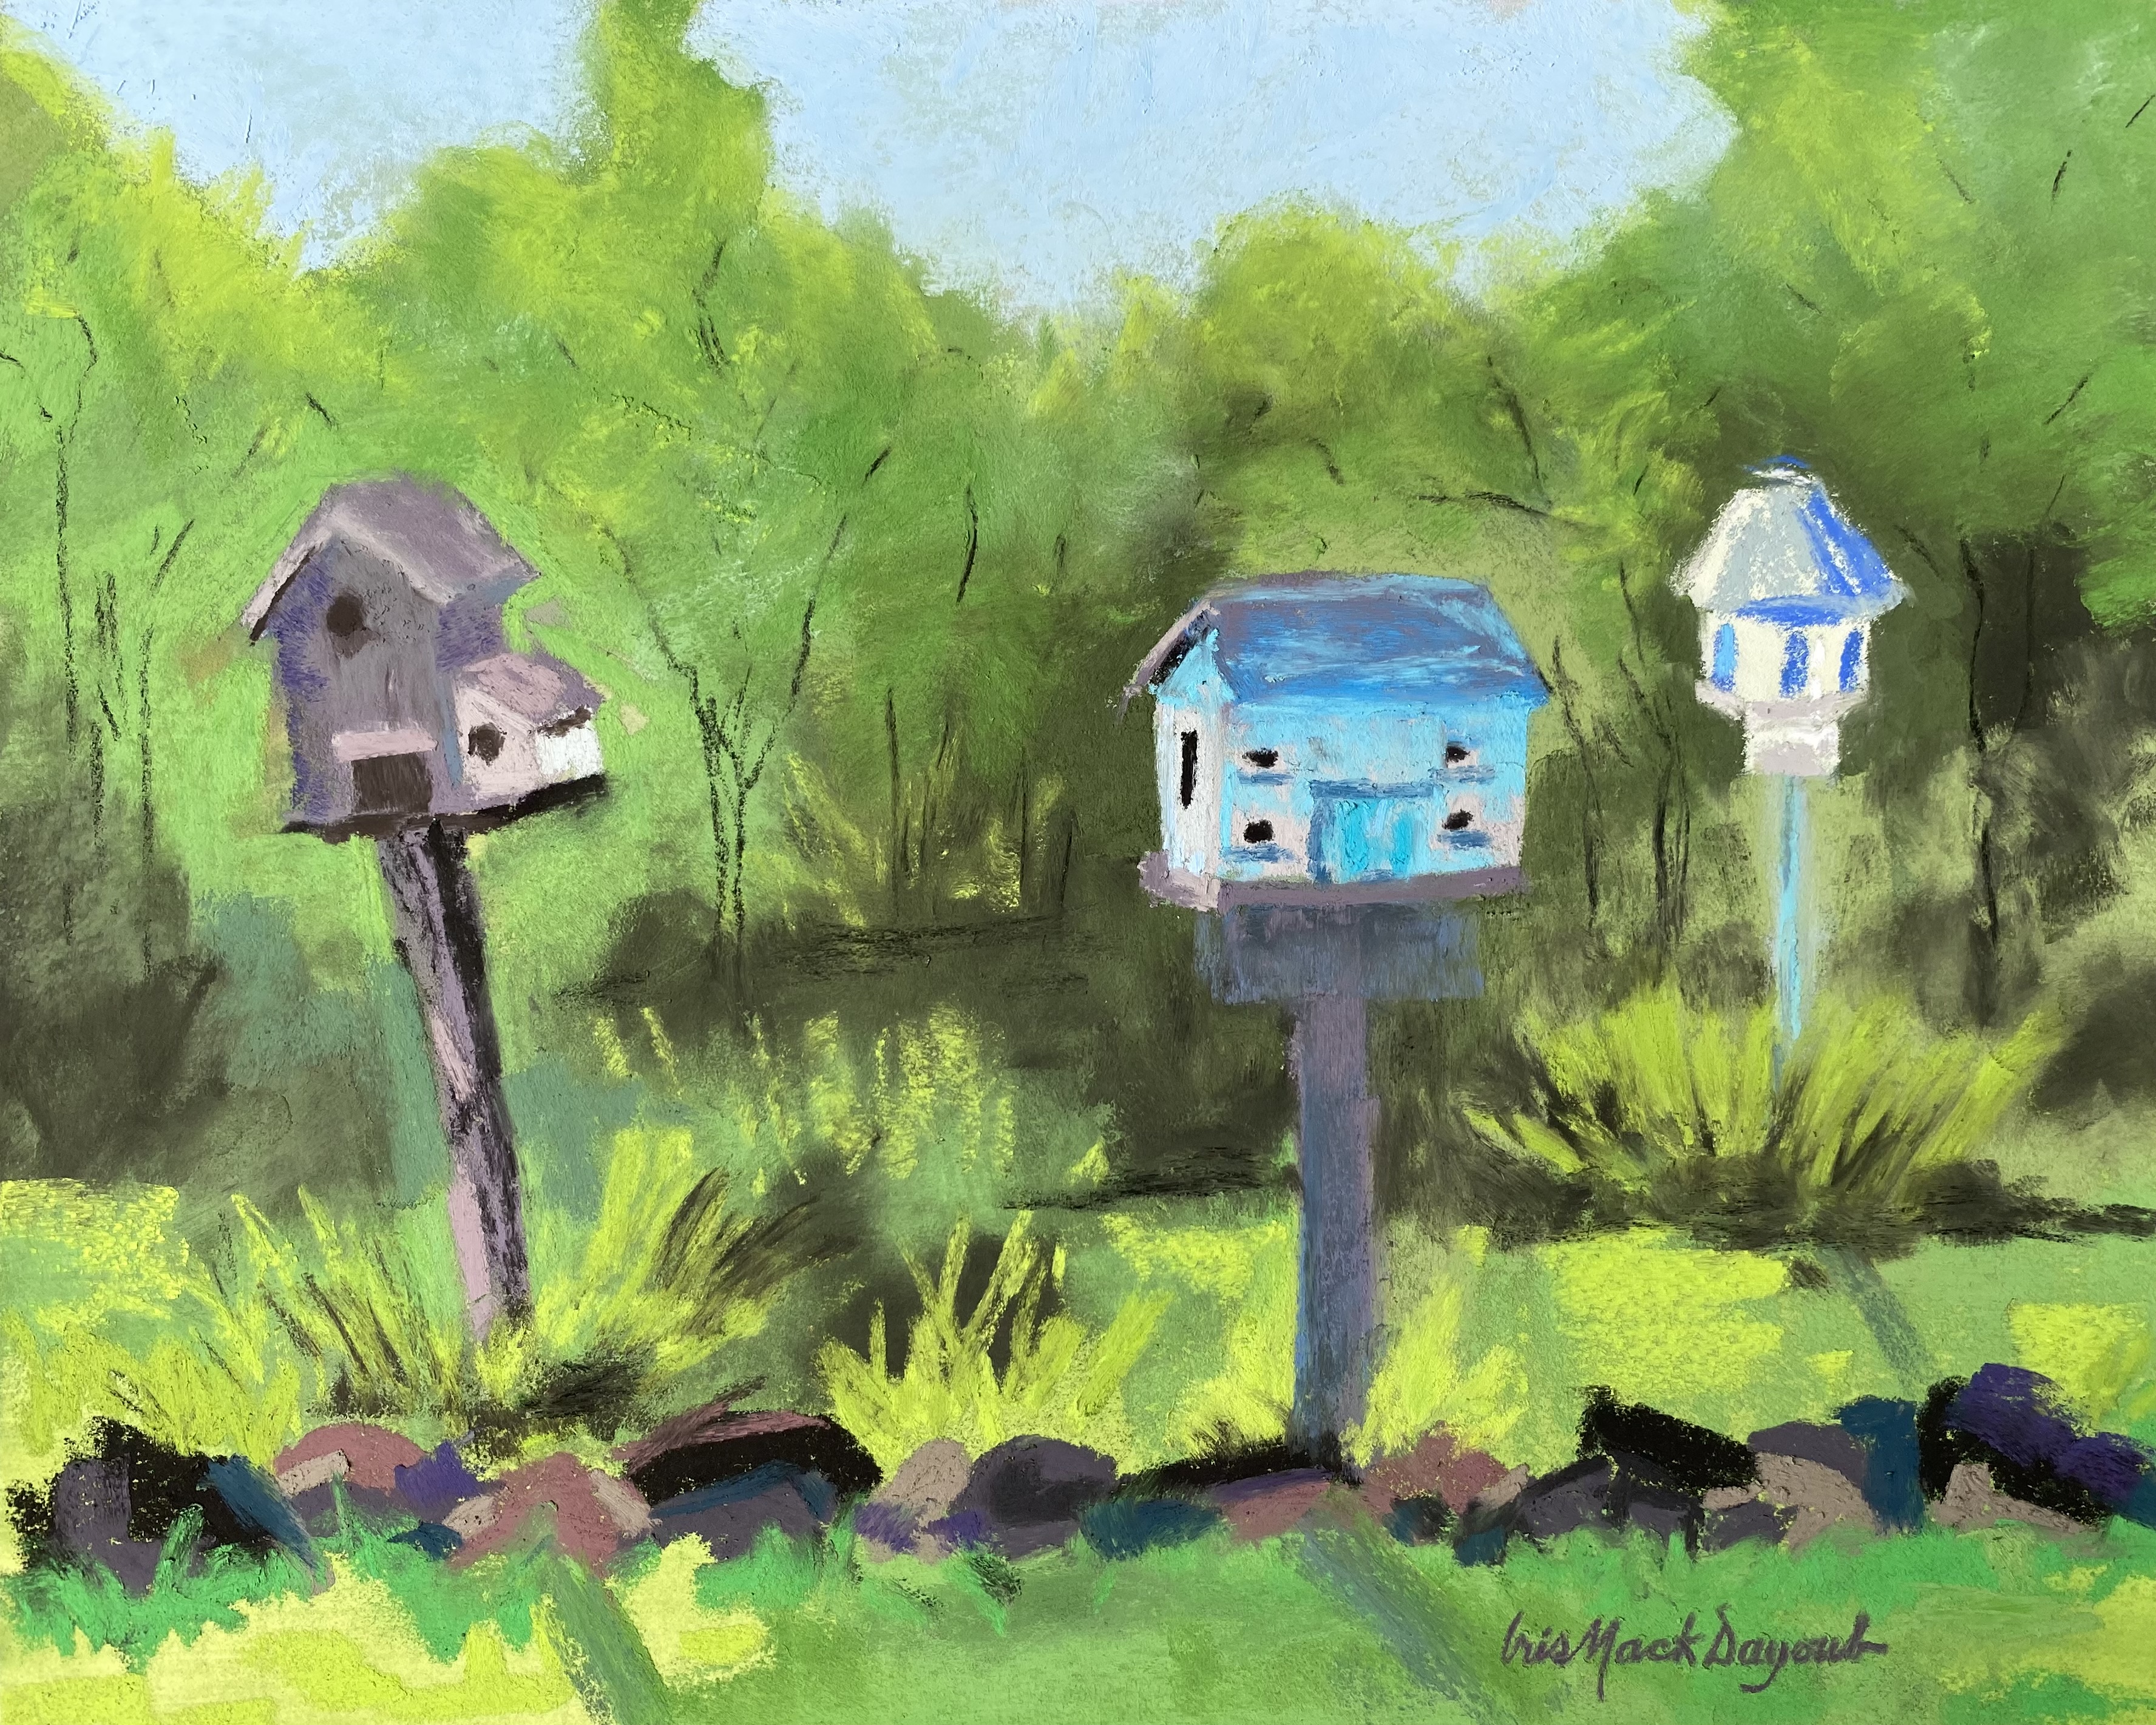 The Birdhouses of Nature’s Trace